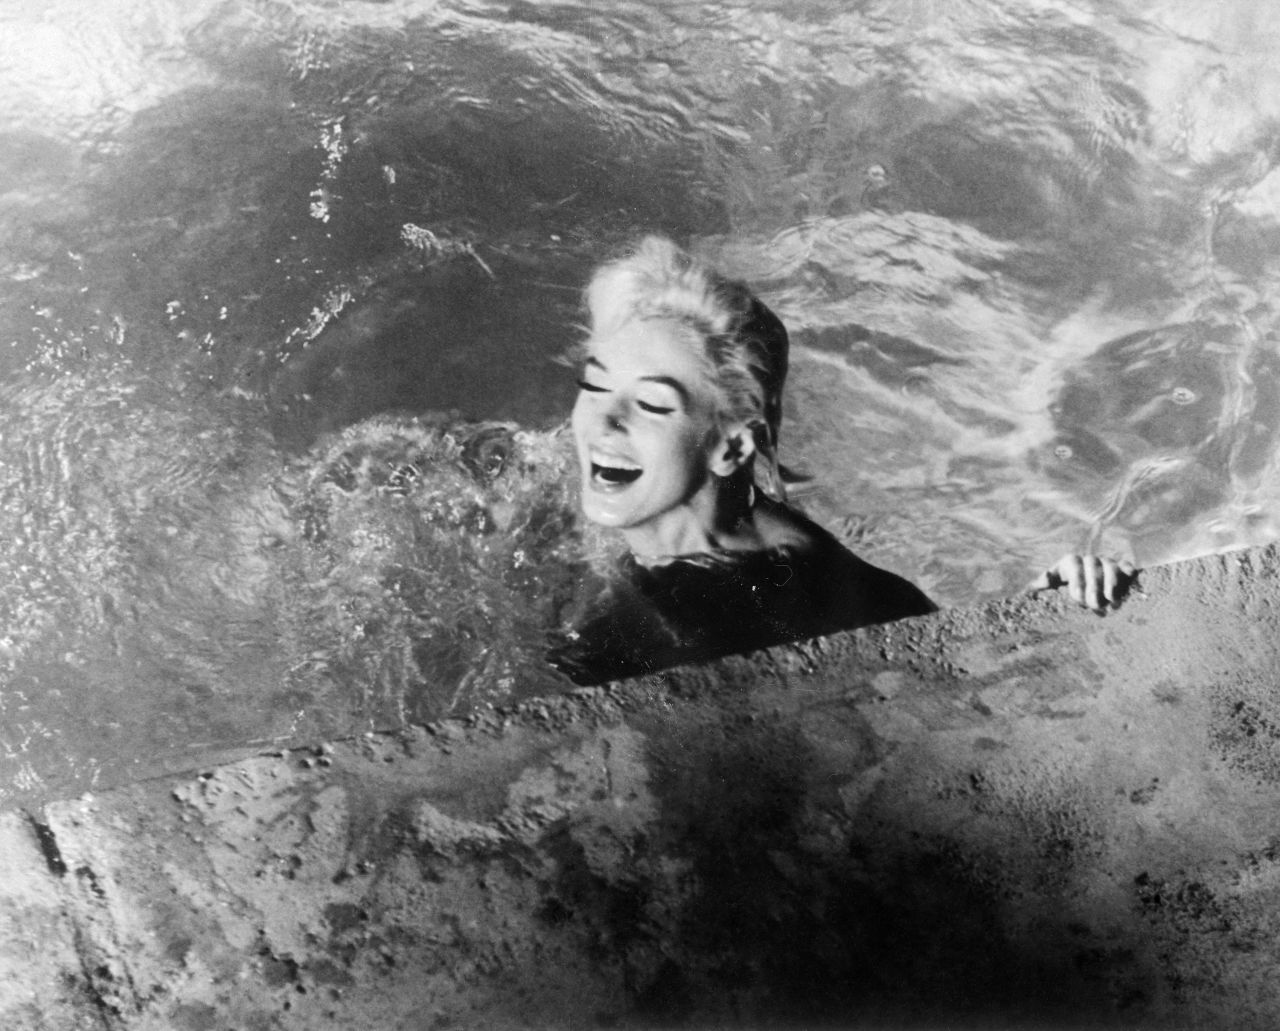 During the filming of "Something's Got to Give," Monroe swims in the nude. The 1962 movie was never completed due to Monroe's sudden death during production. <br /><br />In released clips, Monroe is seen playing a mother. "It naturally brings a certain softness. You can't help but to wonder what could have been. And I'm sure I'm not the only person to have thought that while watching those scenes," said film critic Christina Newland.